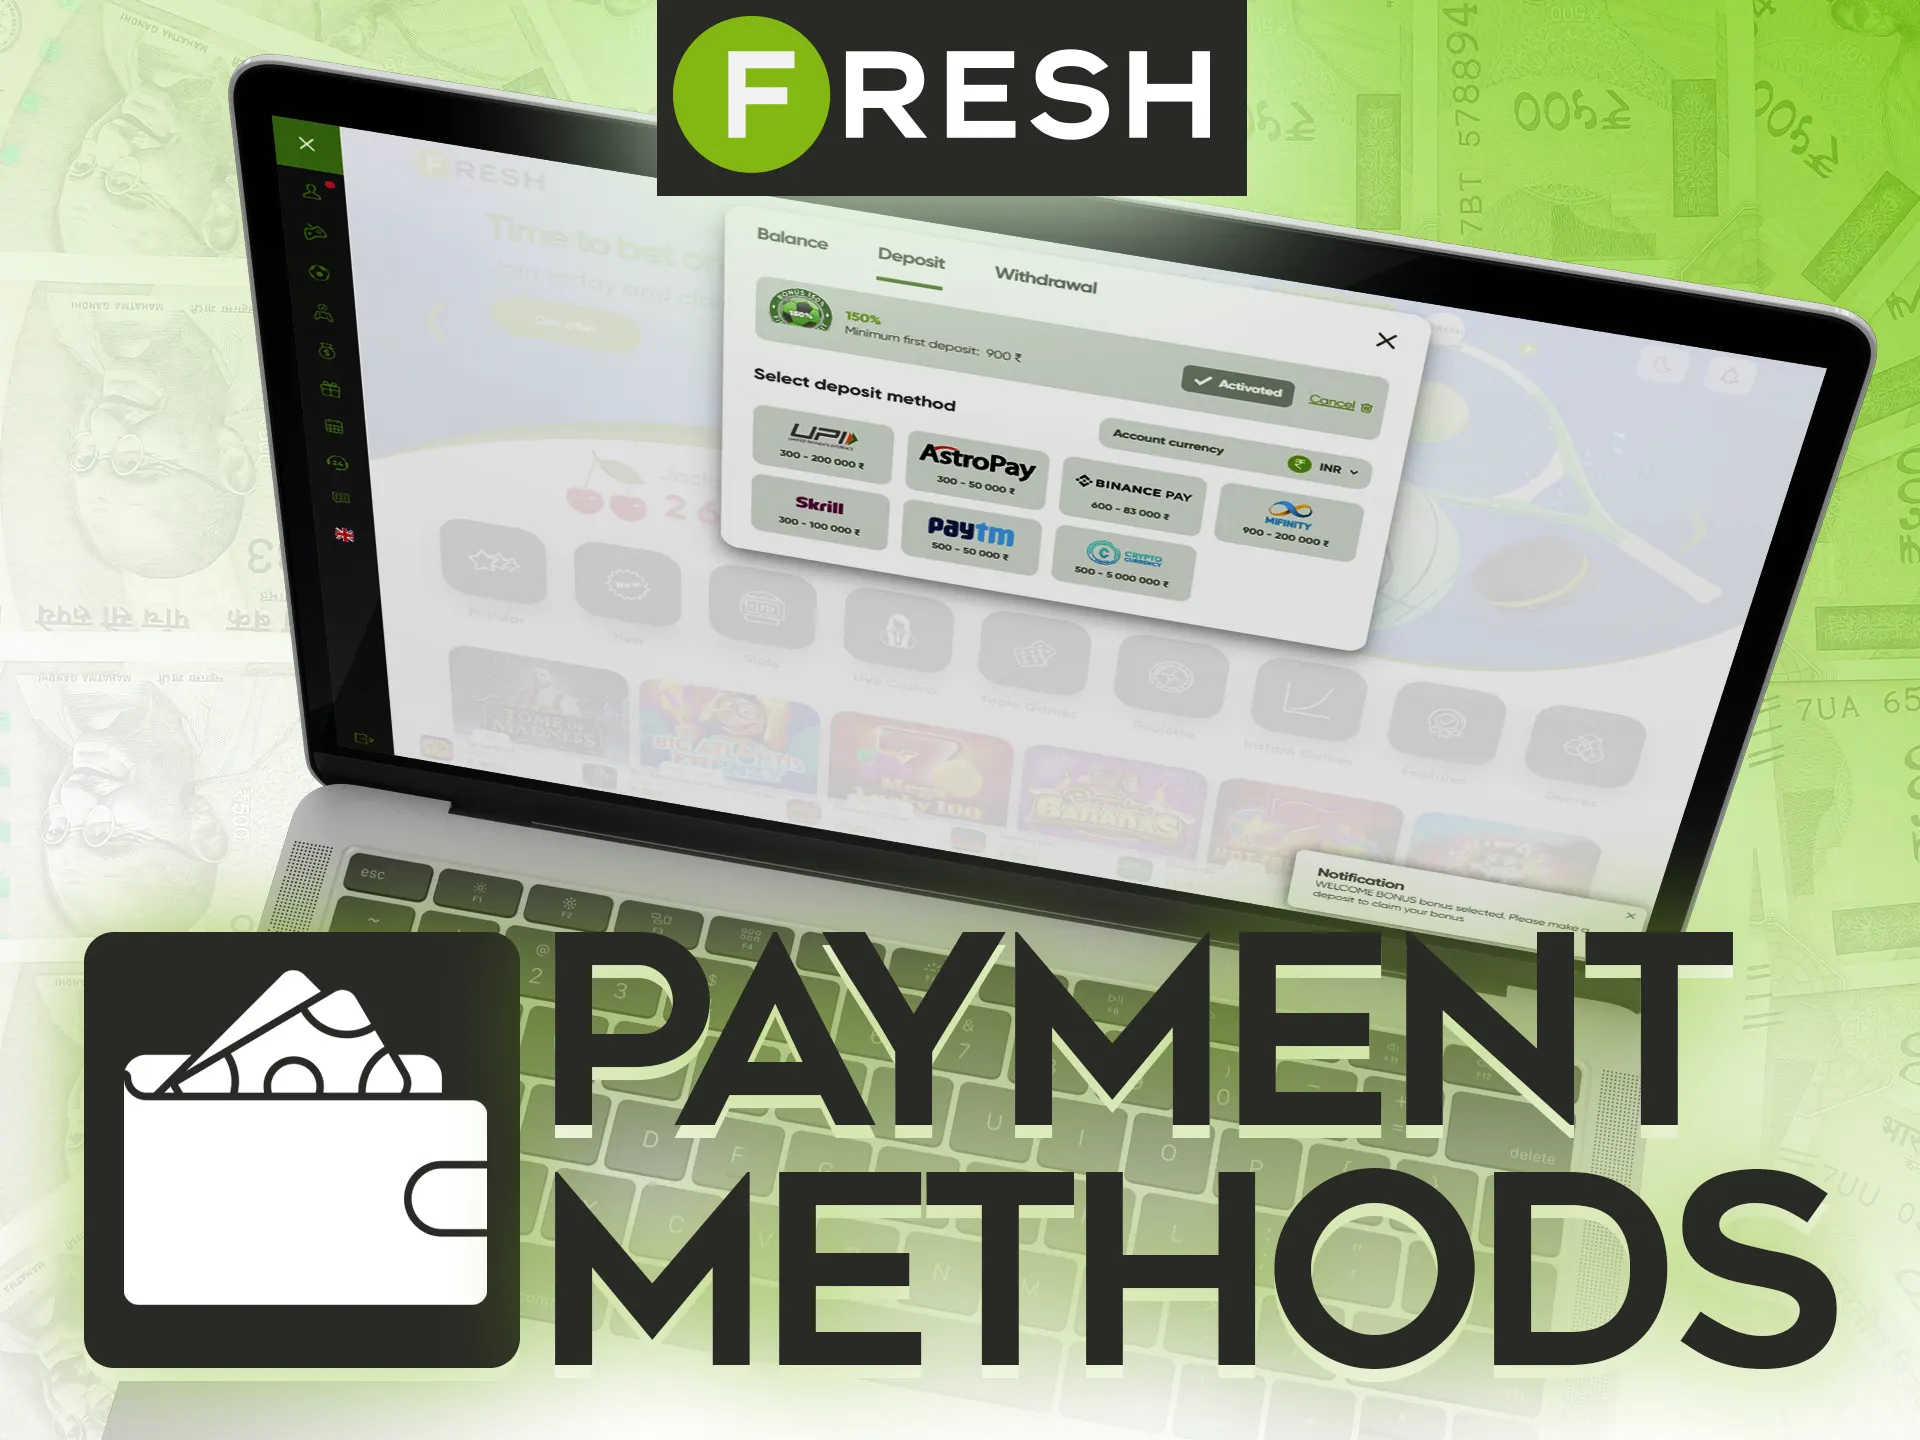 Choose your preferred payment methods for transactions at the Fresh Casino.